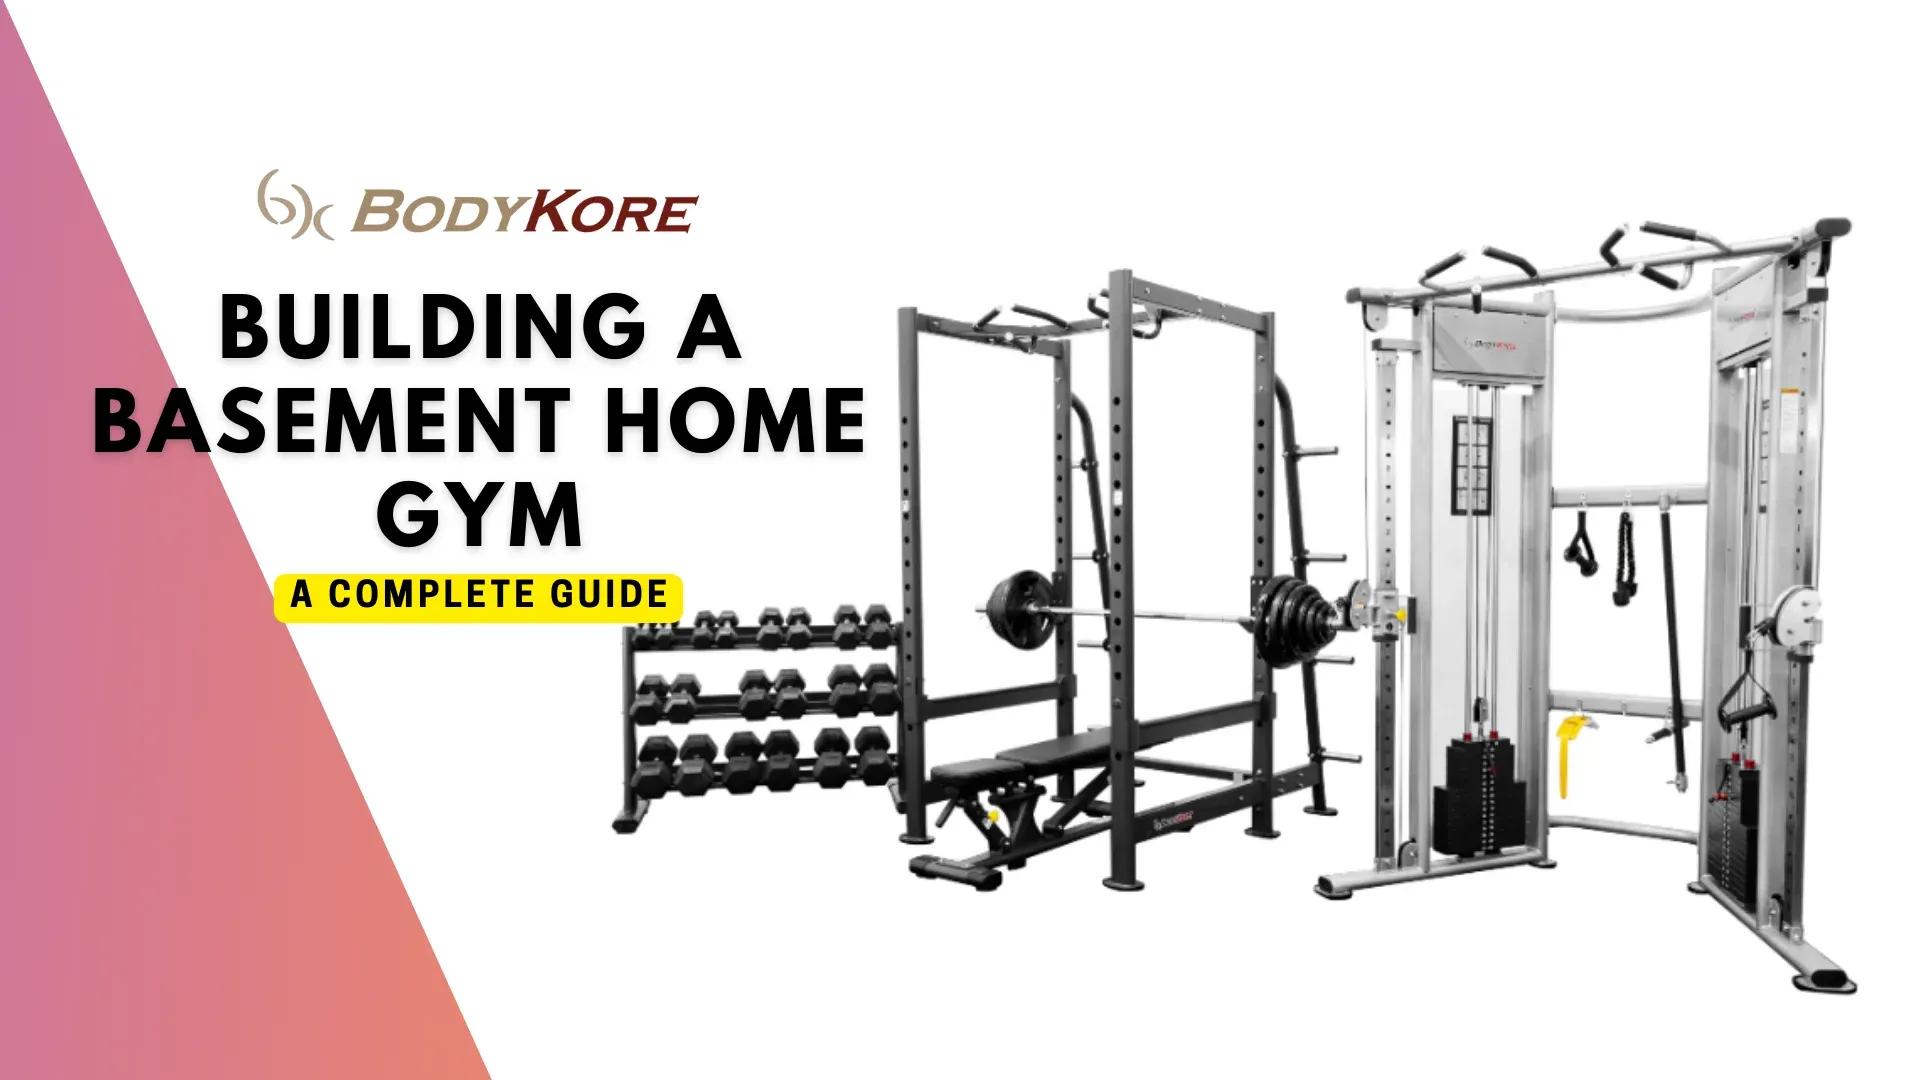 Building a Basement Home Gym: Planning and Equipment